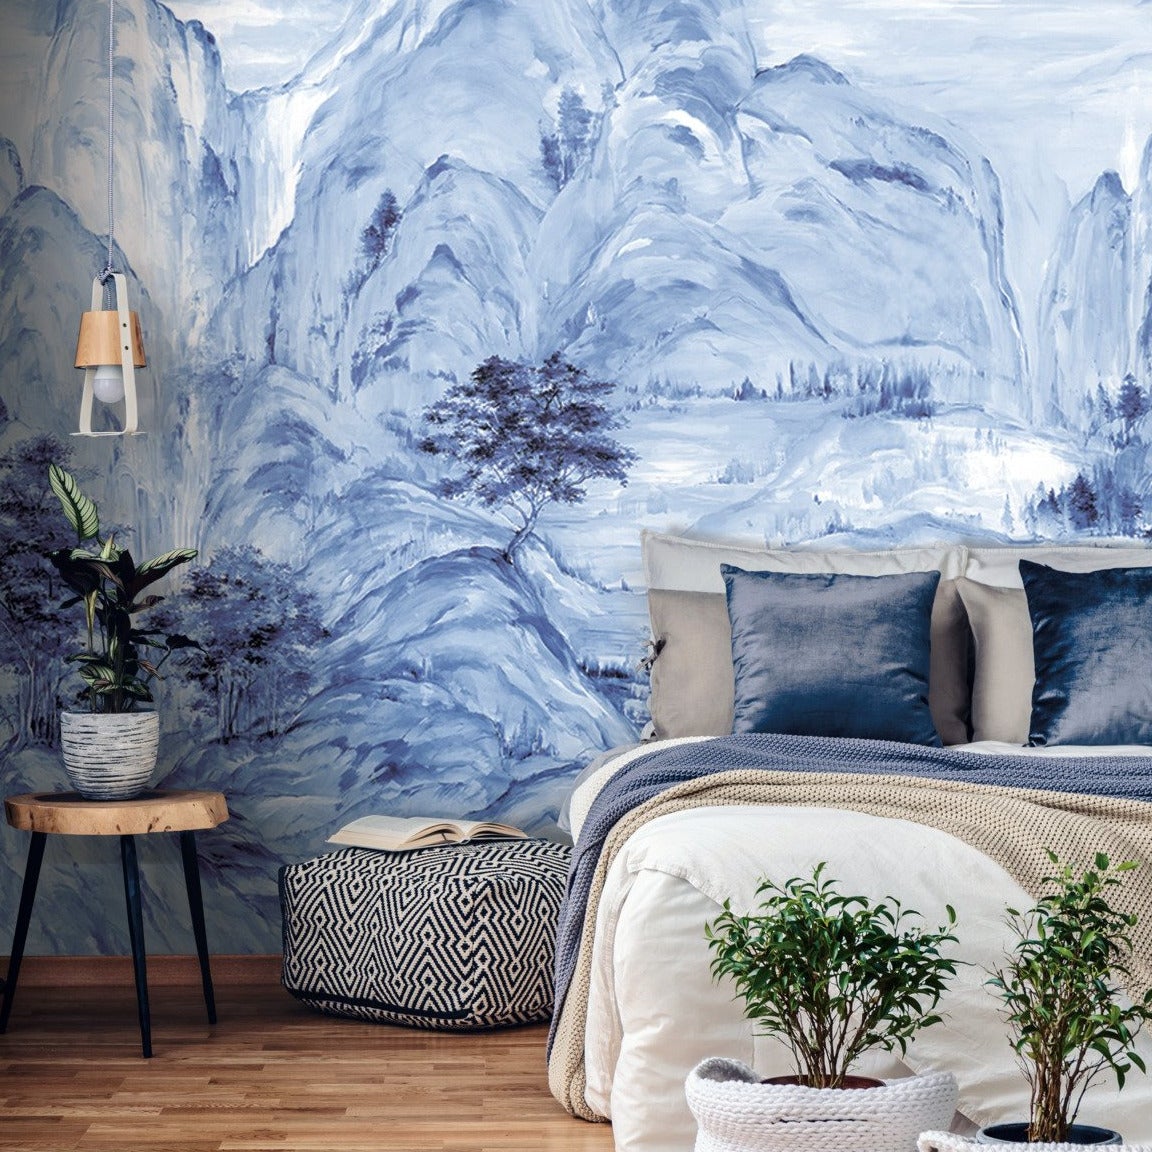 Mountains Changing Color  Wall Mural PVC free Wall Covering  Wall Murals  Wall Paper Decor Home Decor  BestOfBharat